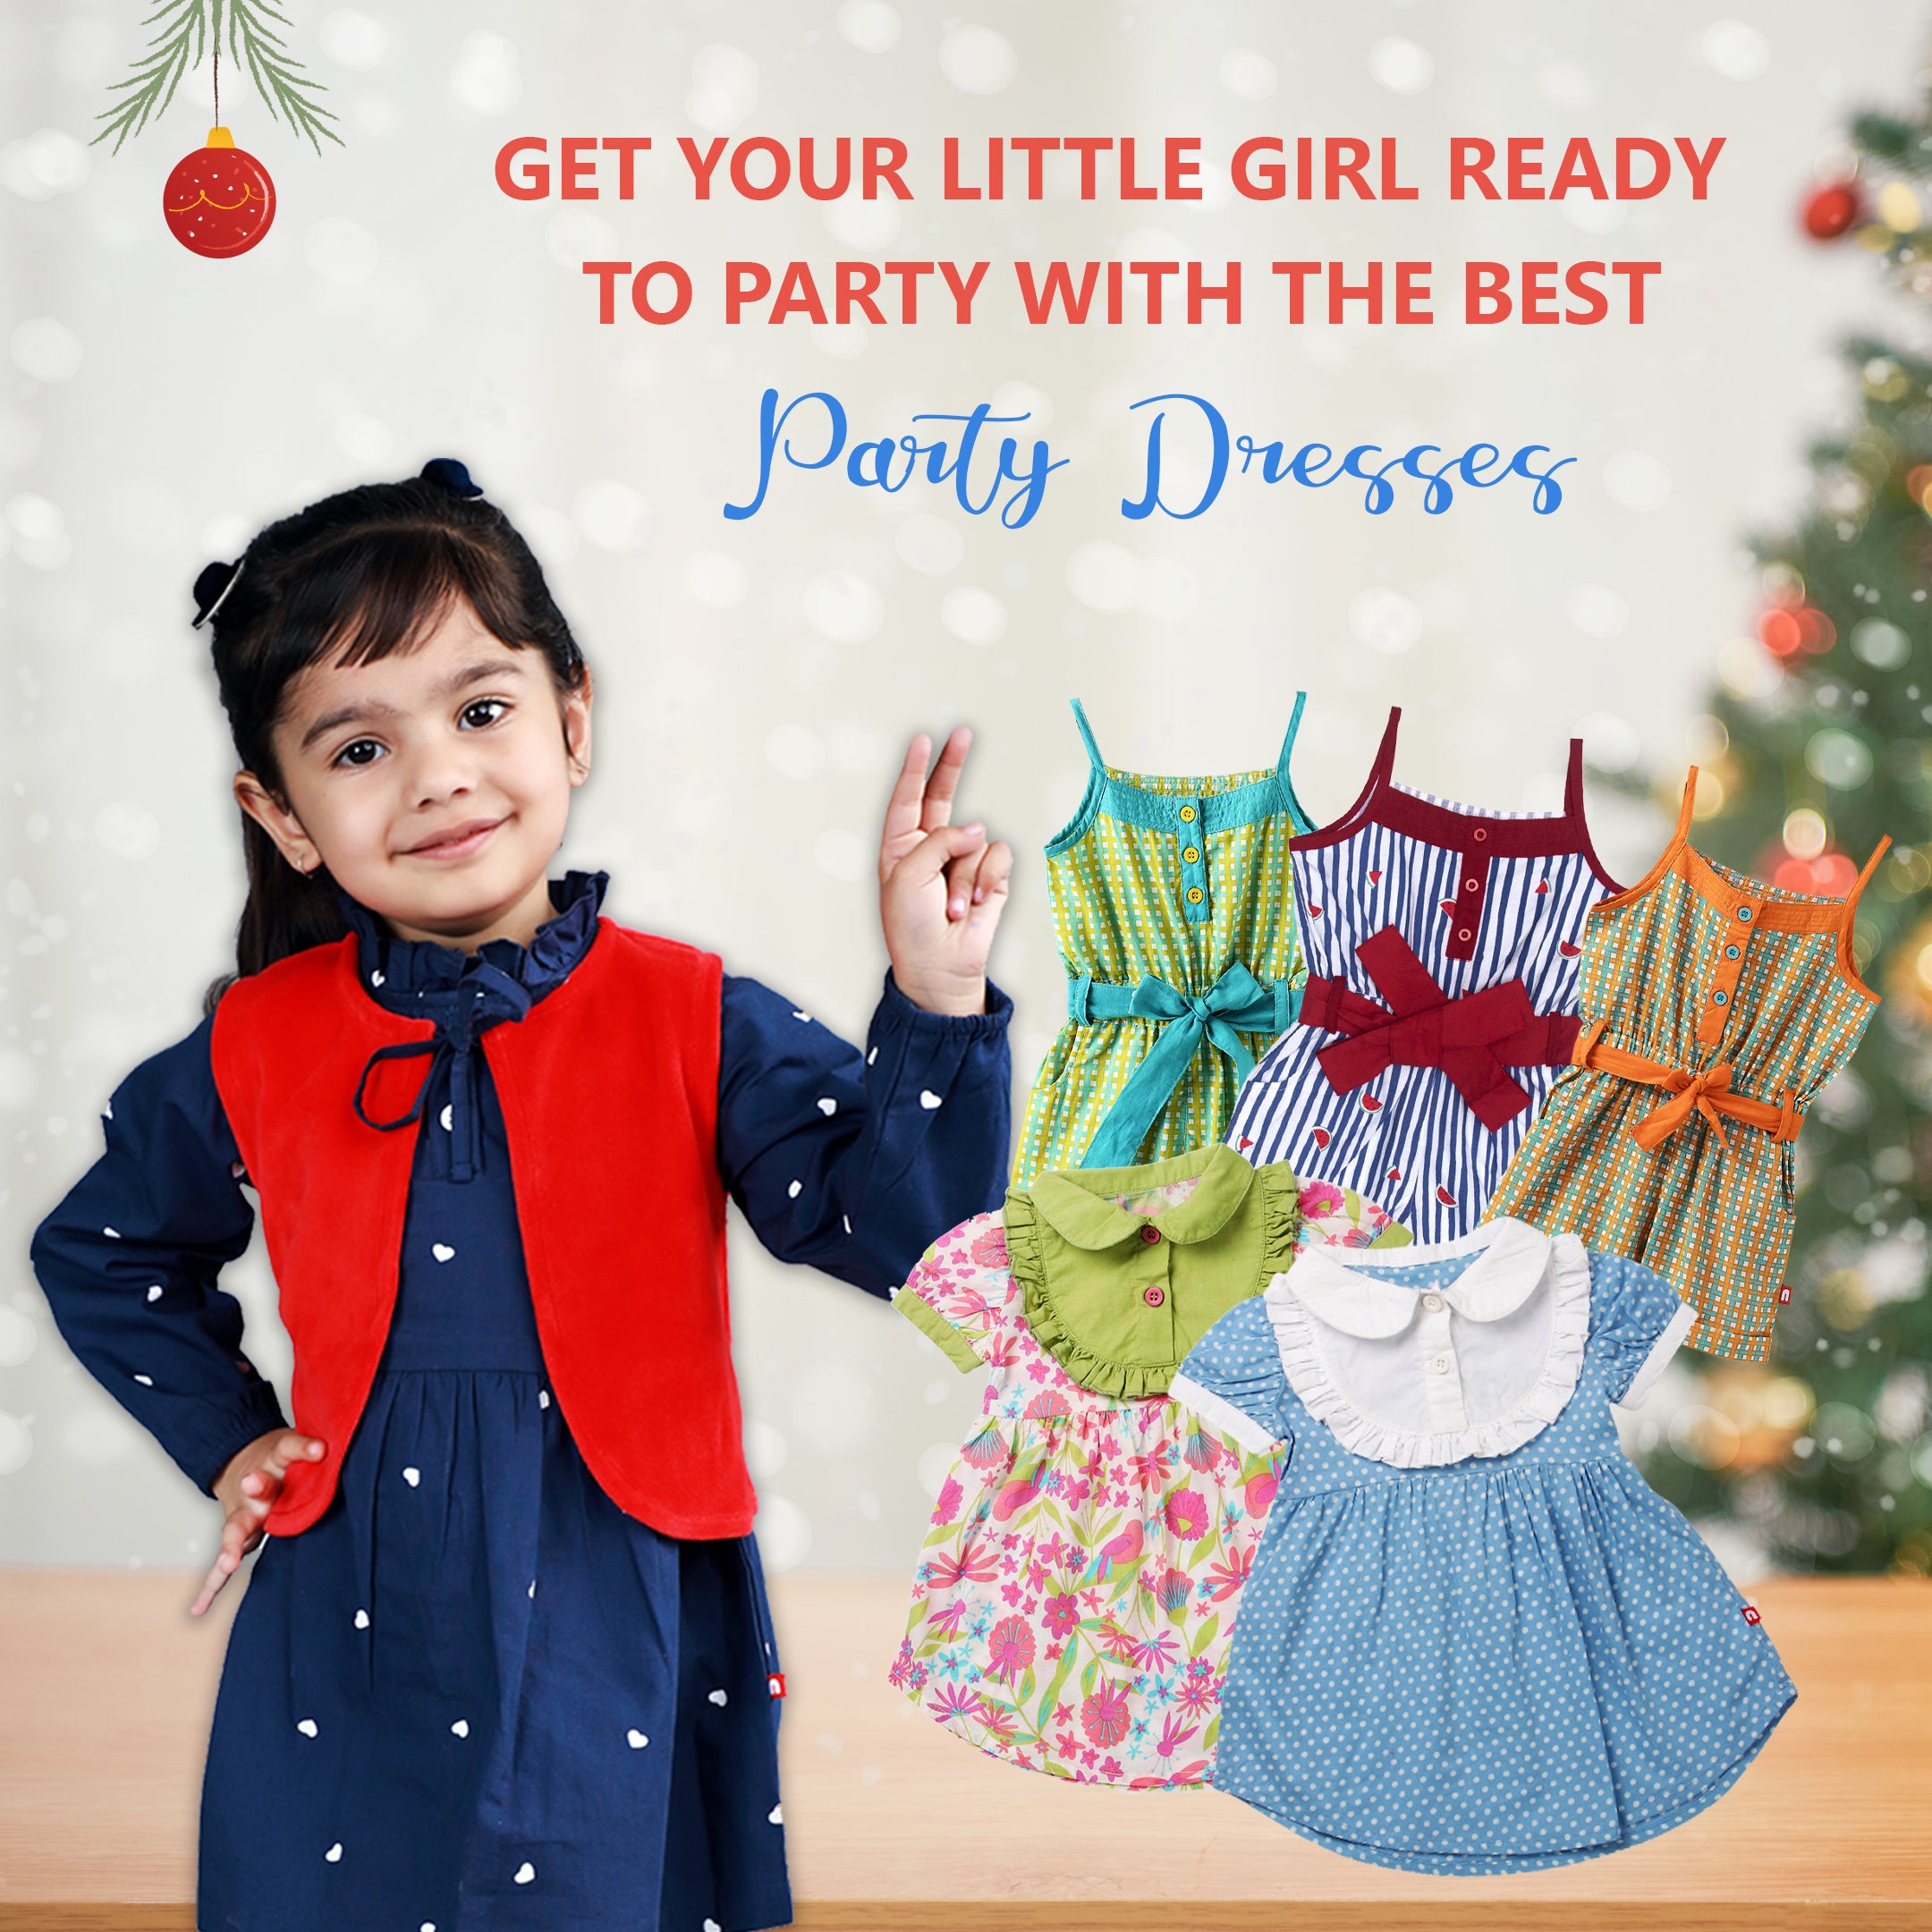 GET YOUR LITTLE GIRL READY TO PARTY WITH THE BEST PARTY DRESSES